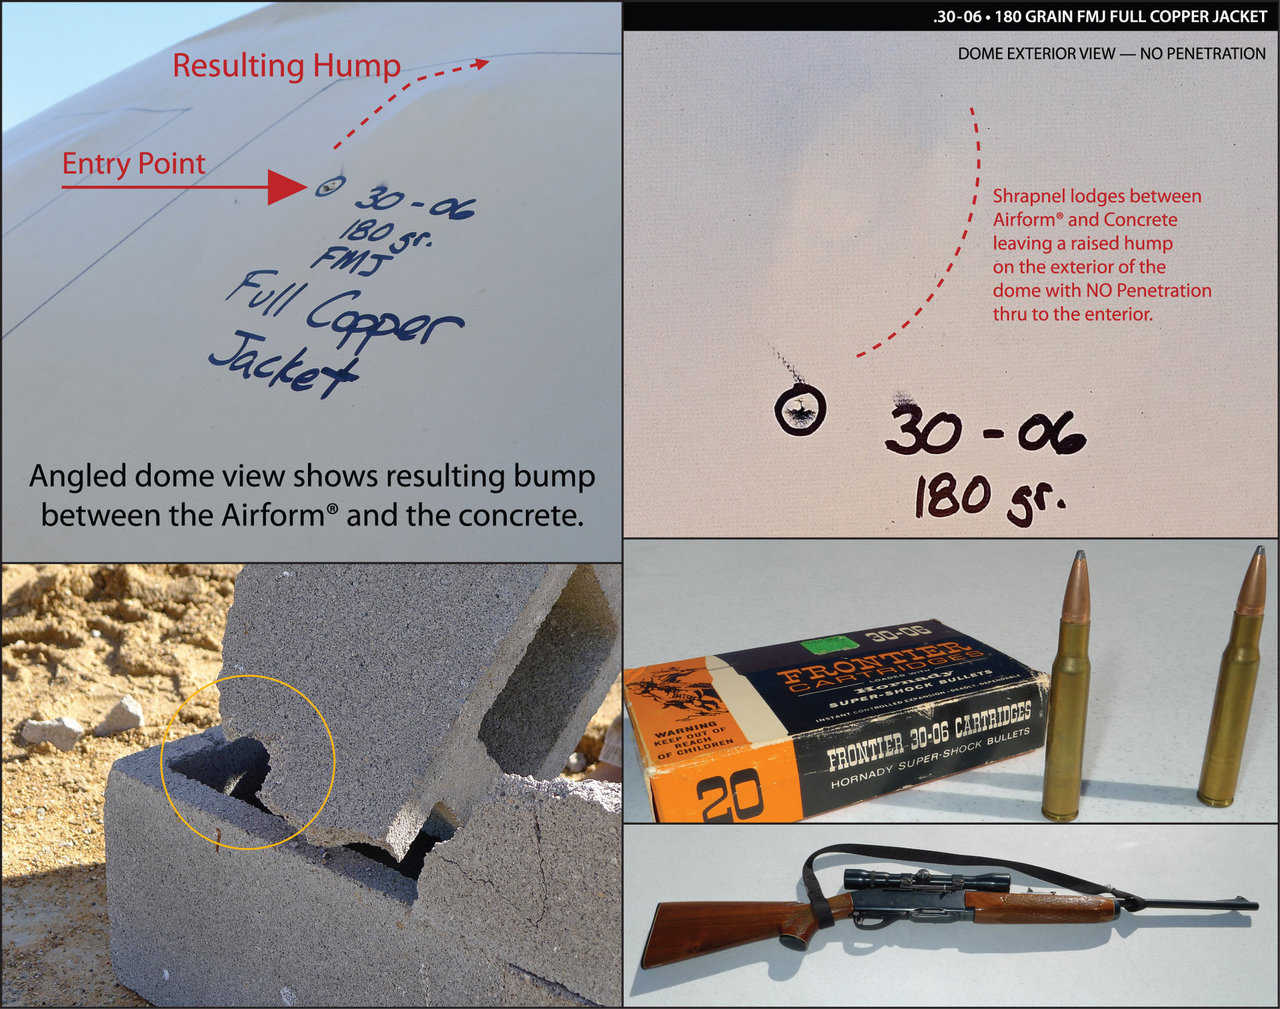 This rifle is a 30-06 and is by far the most powerful projectile that we shot at the Monolithic Dome. For this test we used a 180 grain, full metal jack round. It destroyed the cinder block. There was no penetration into the Monolithic Dome. By the top left picture, you can see that the projectile hit the dome and was deflected up the dome shell.